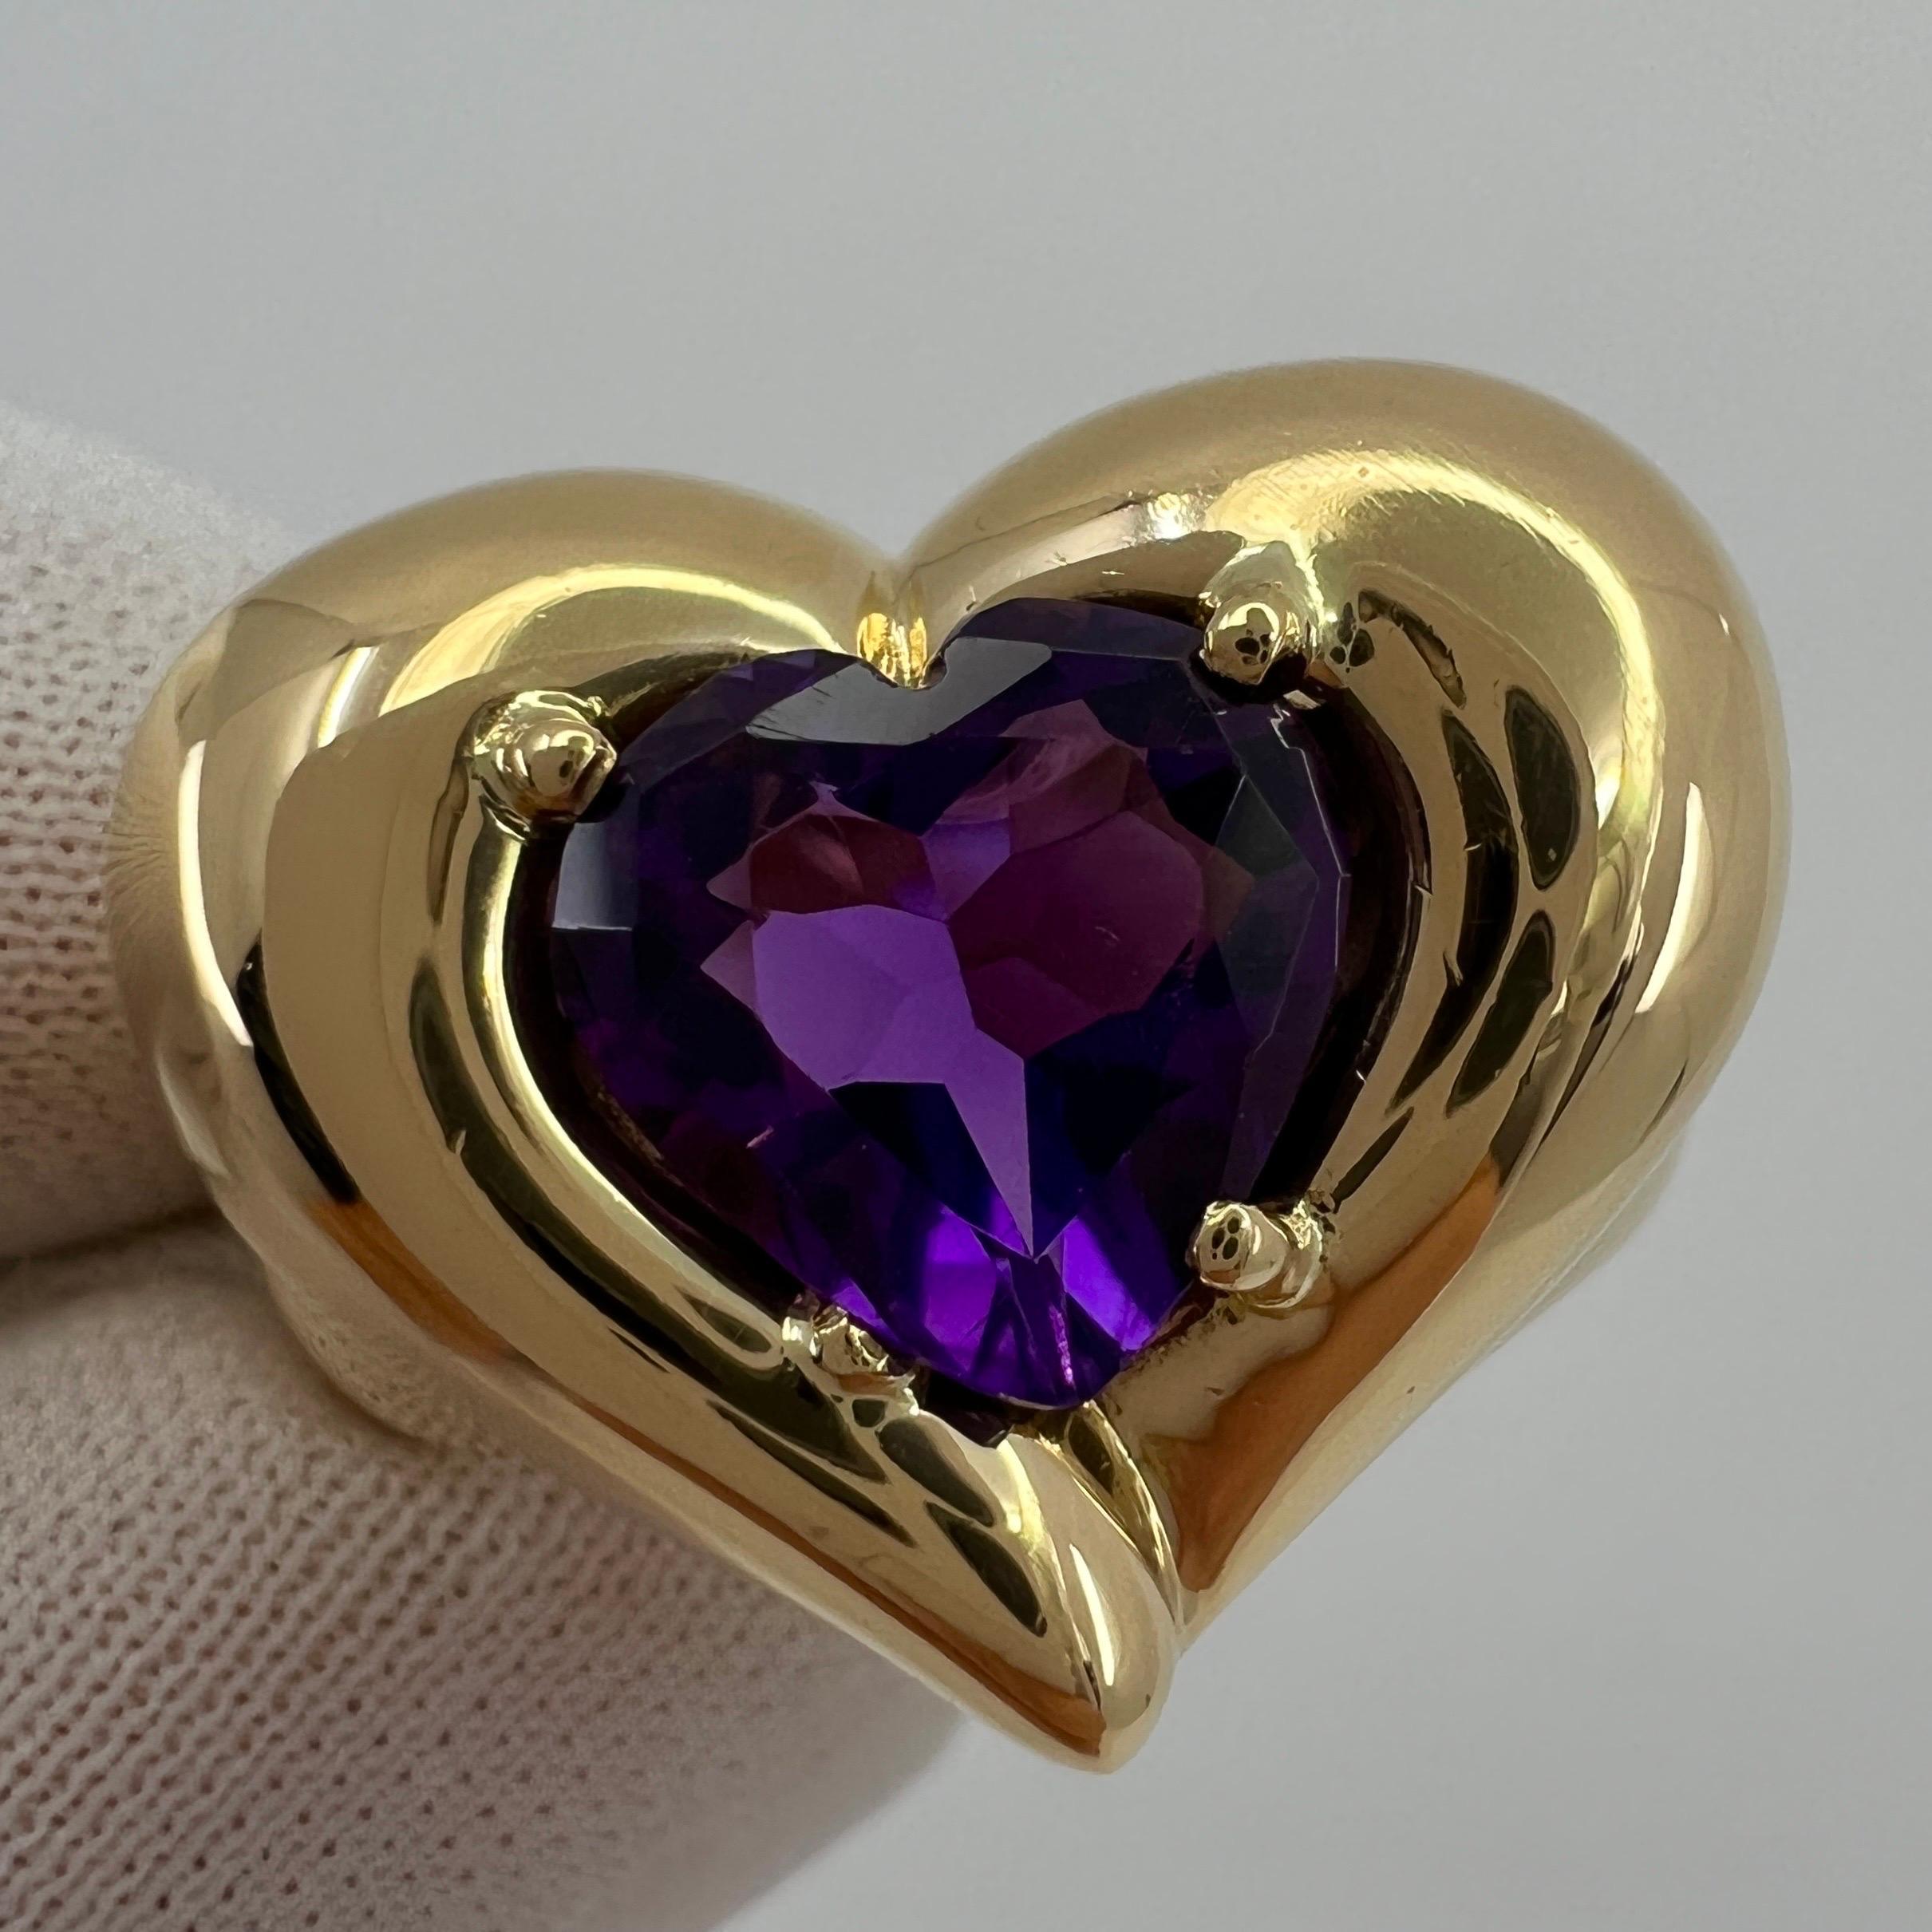 Rare Vintage Van Cleef & Arpels 18k Yellow Gold Amethyst Heart Ring with Box 4